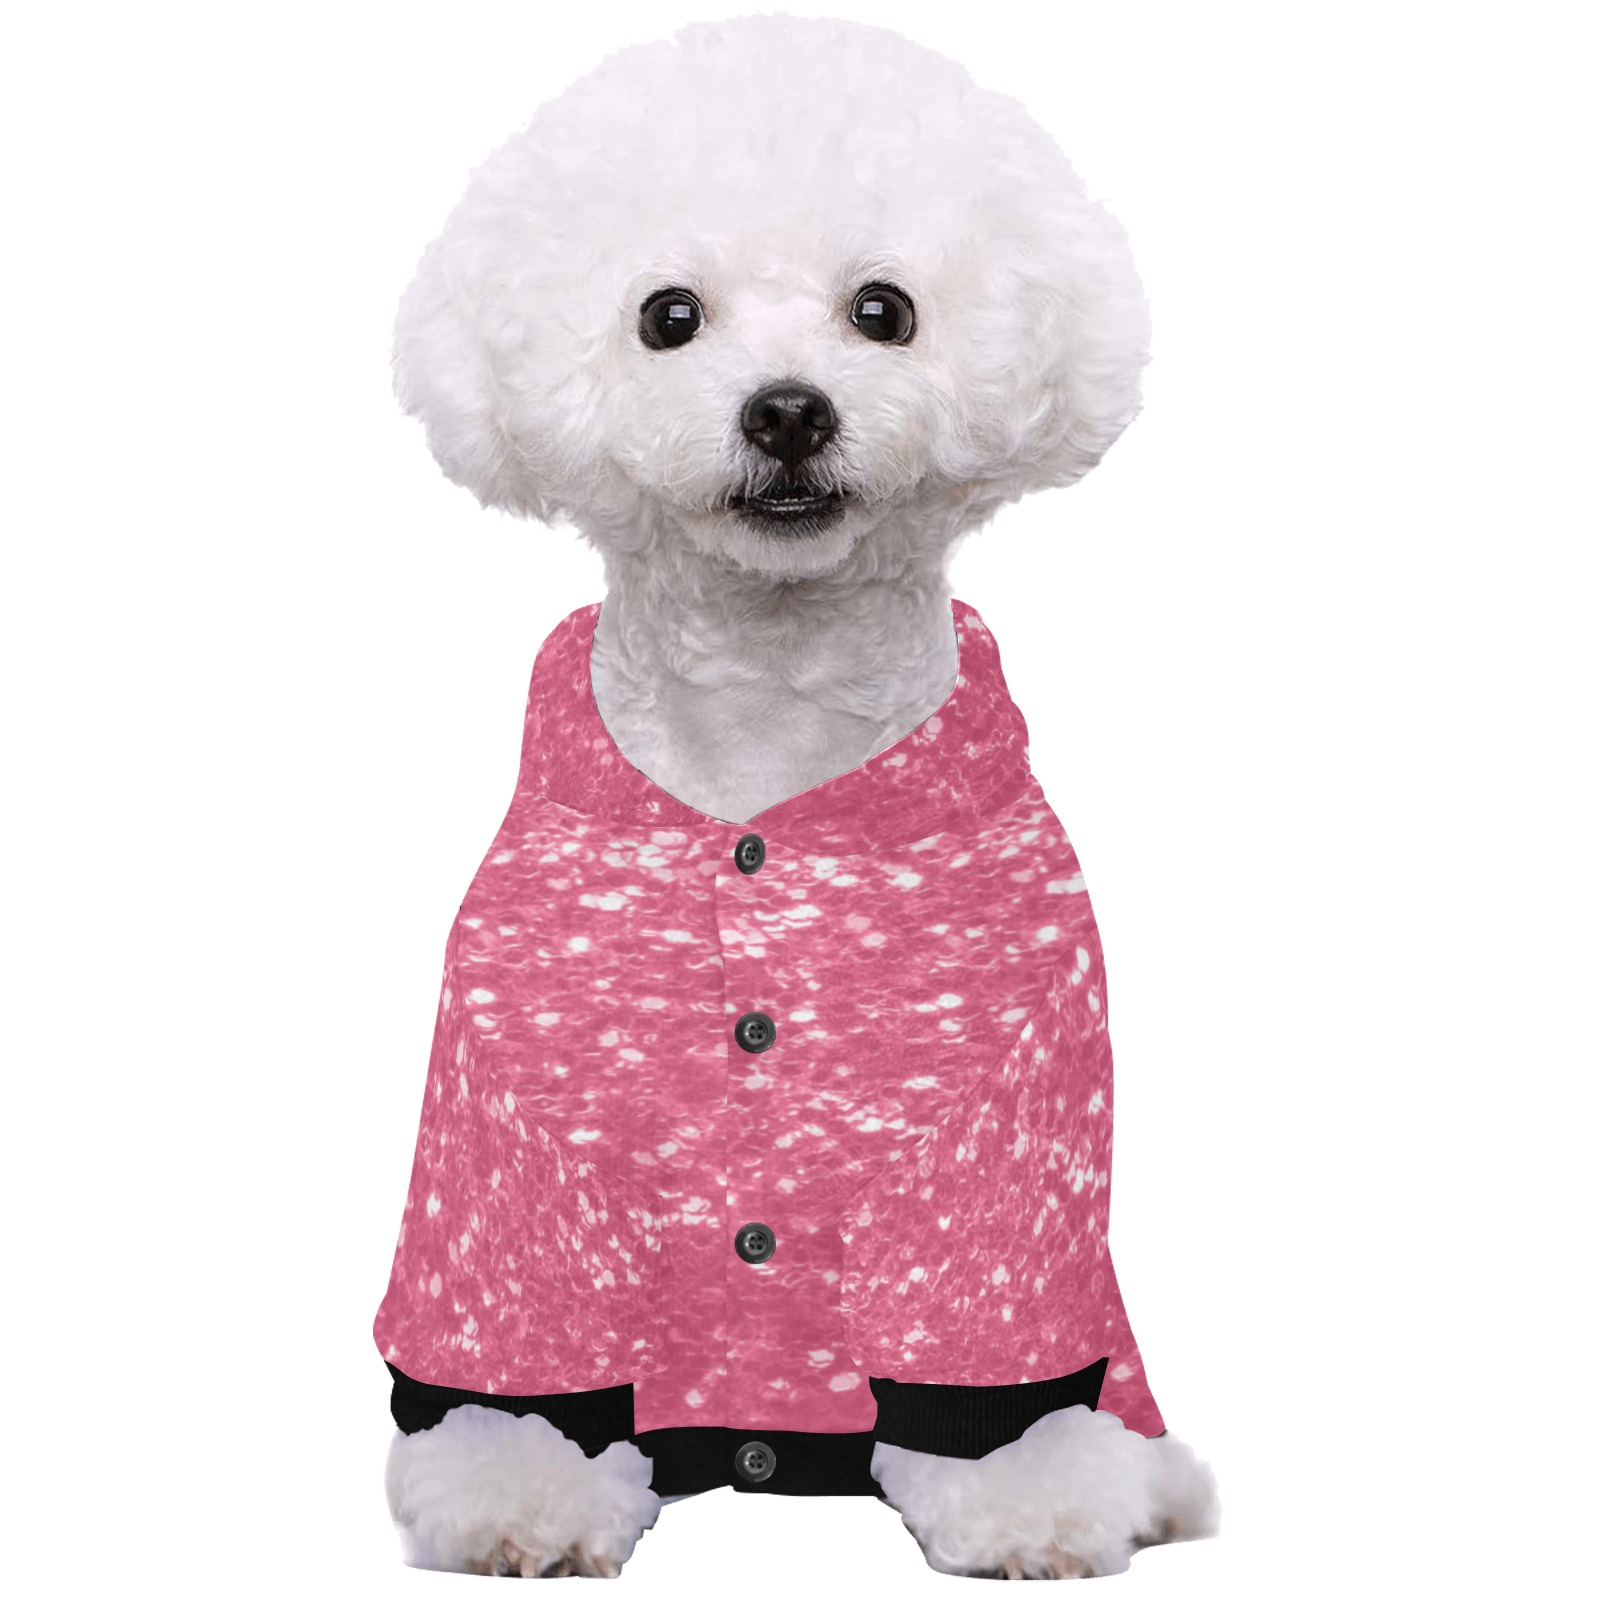 Magenta light pink red faux sparkles glitter Pet Dog Hoodie